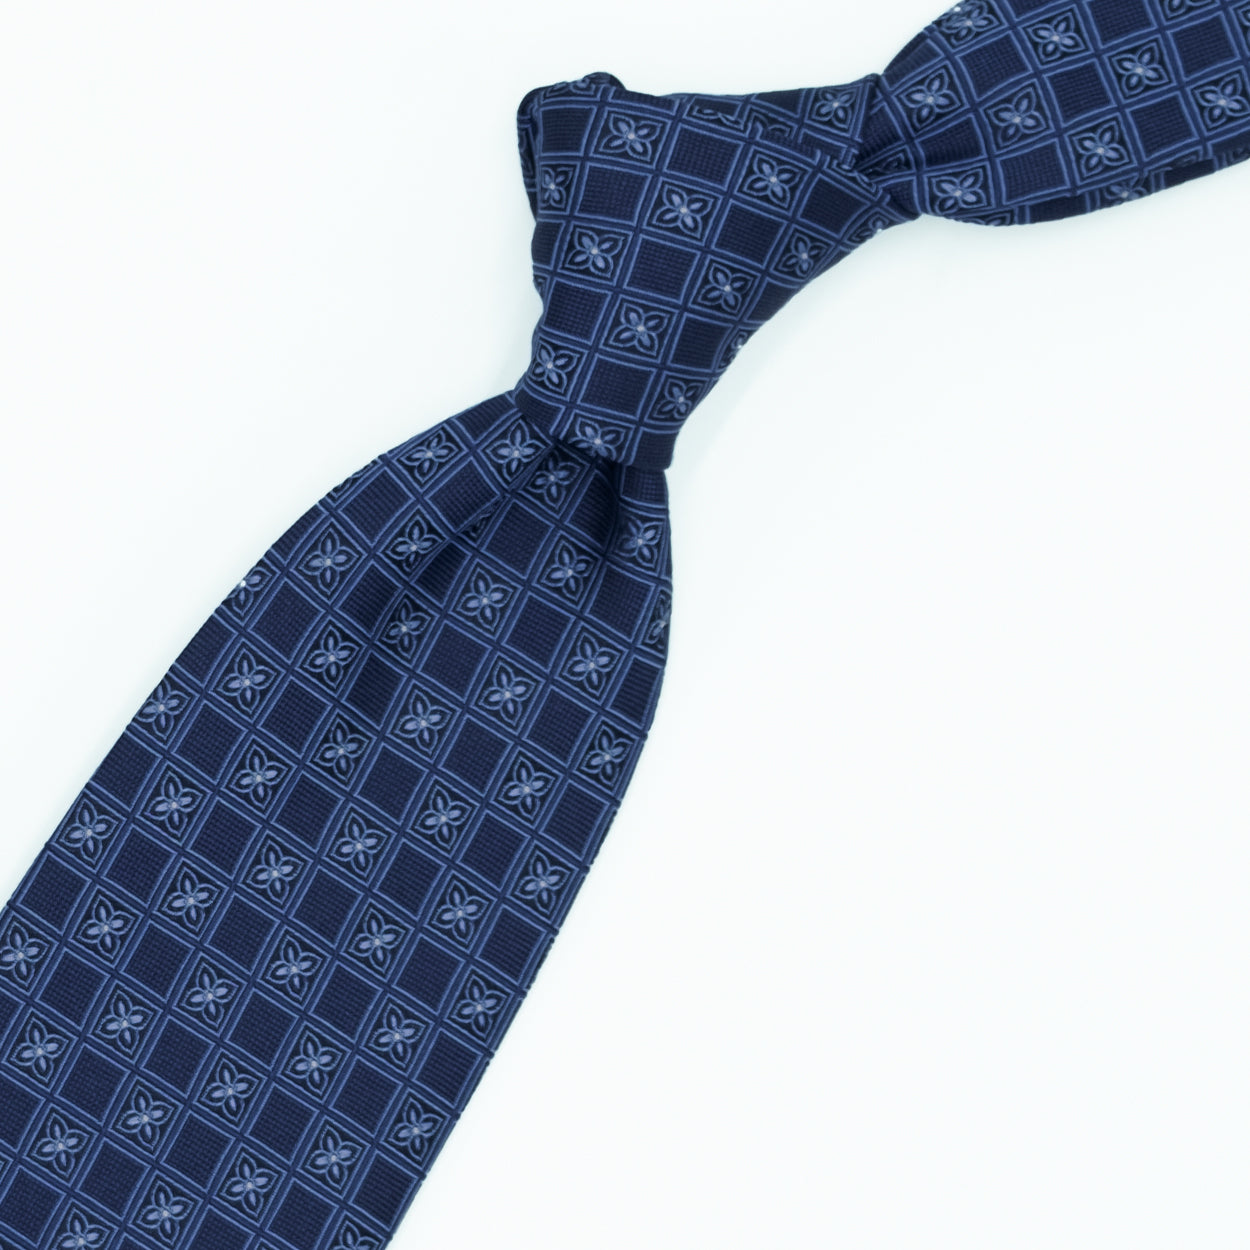 Blue tie with blue flowers and white dots